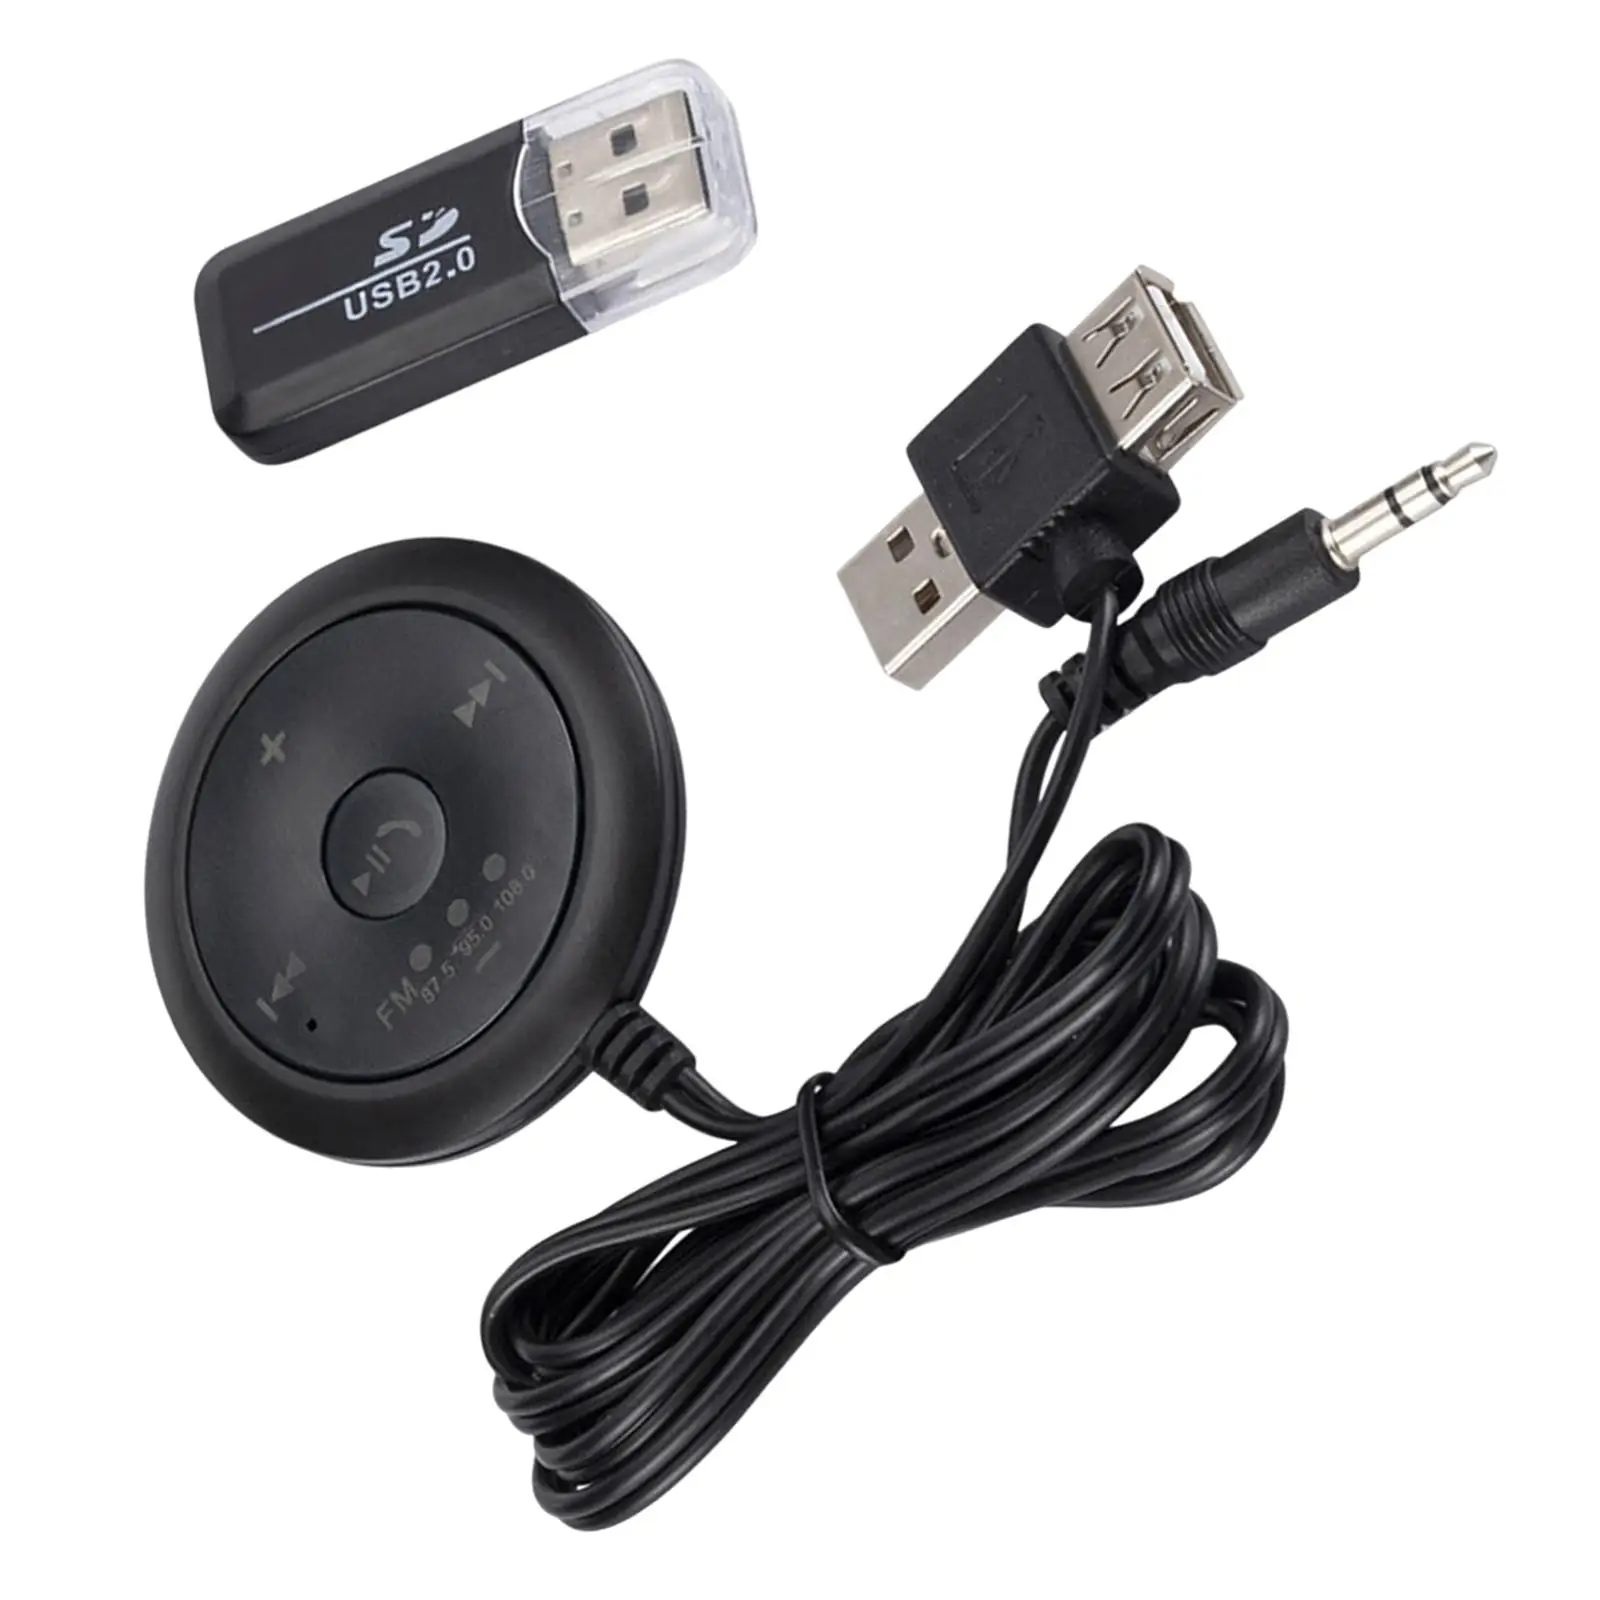 Wireless Car MP3 Player Plastic Audio Transmitter Receiver Adapter for Home